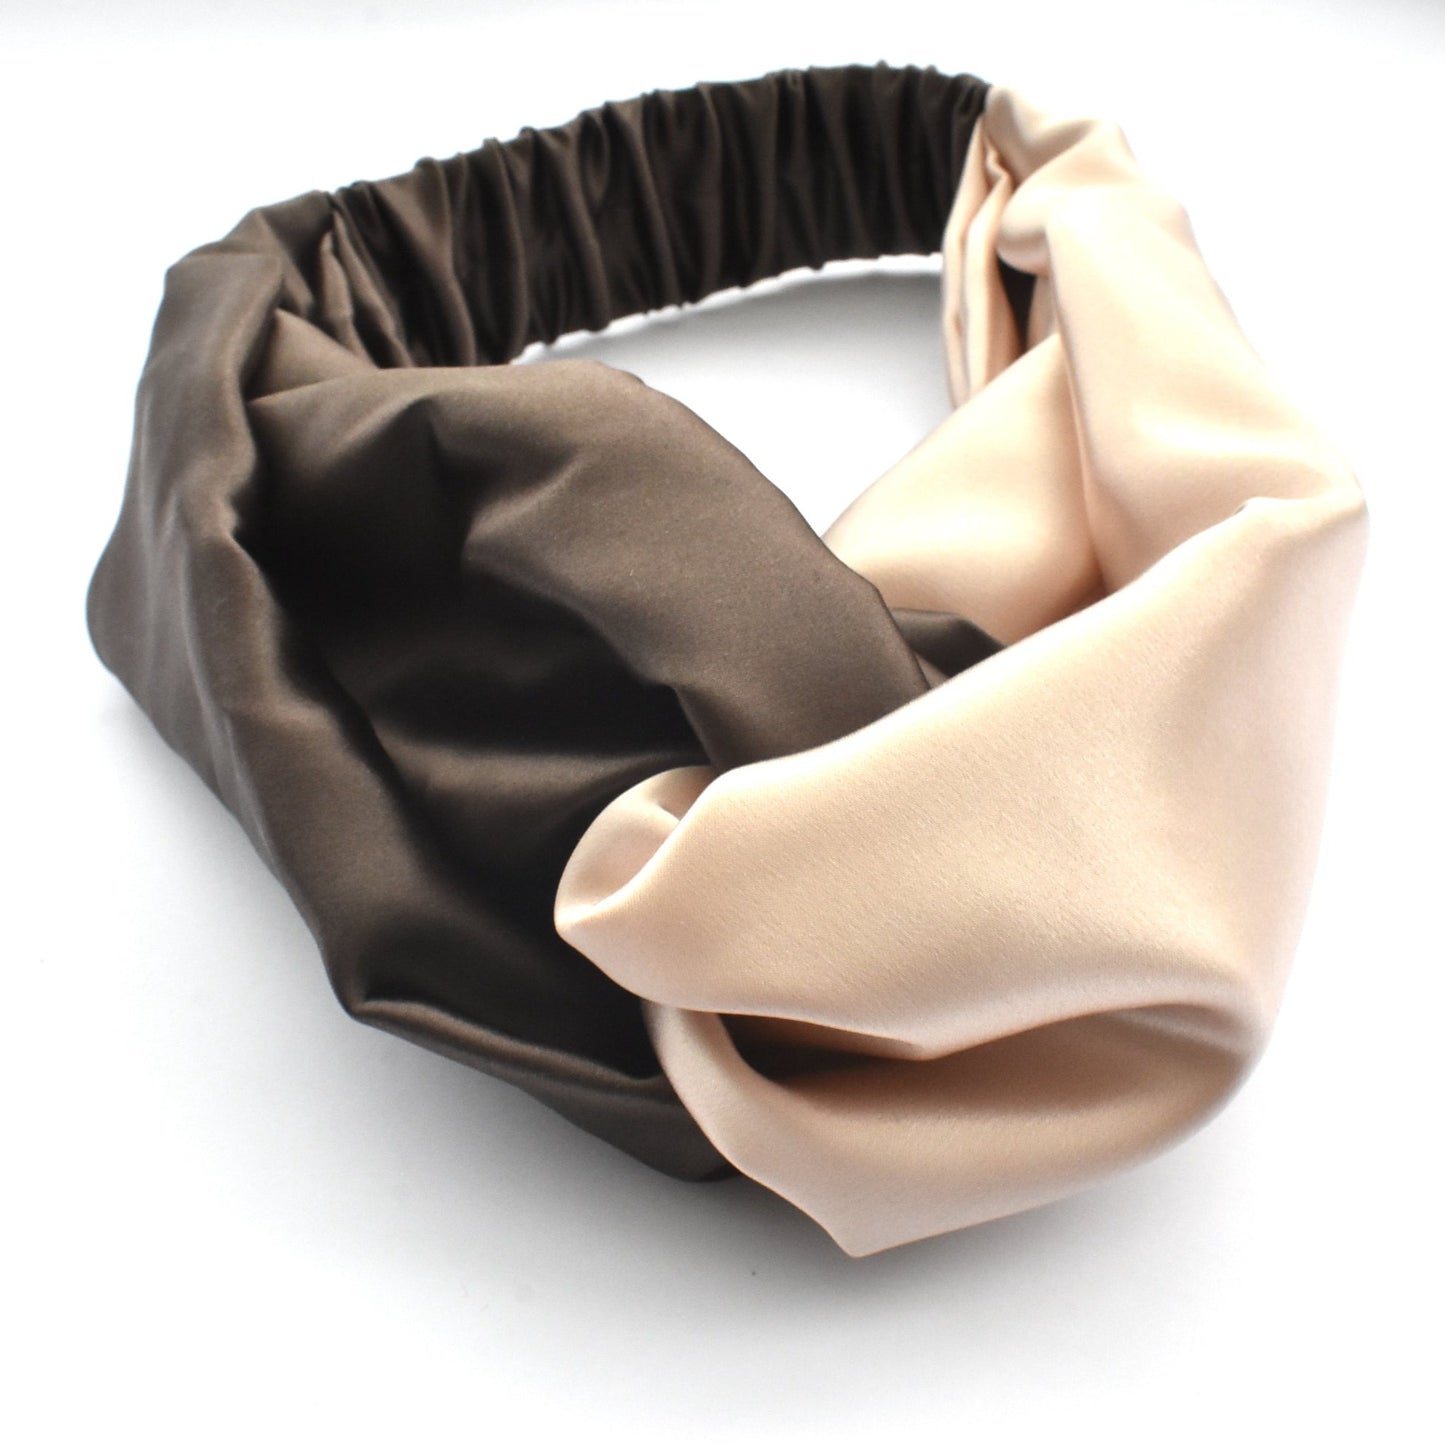 Neutral Blush Pink and Brown Split Twisted Turban hairband and neck scarf in Mulberry Silk - 100% pure silk satin